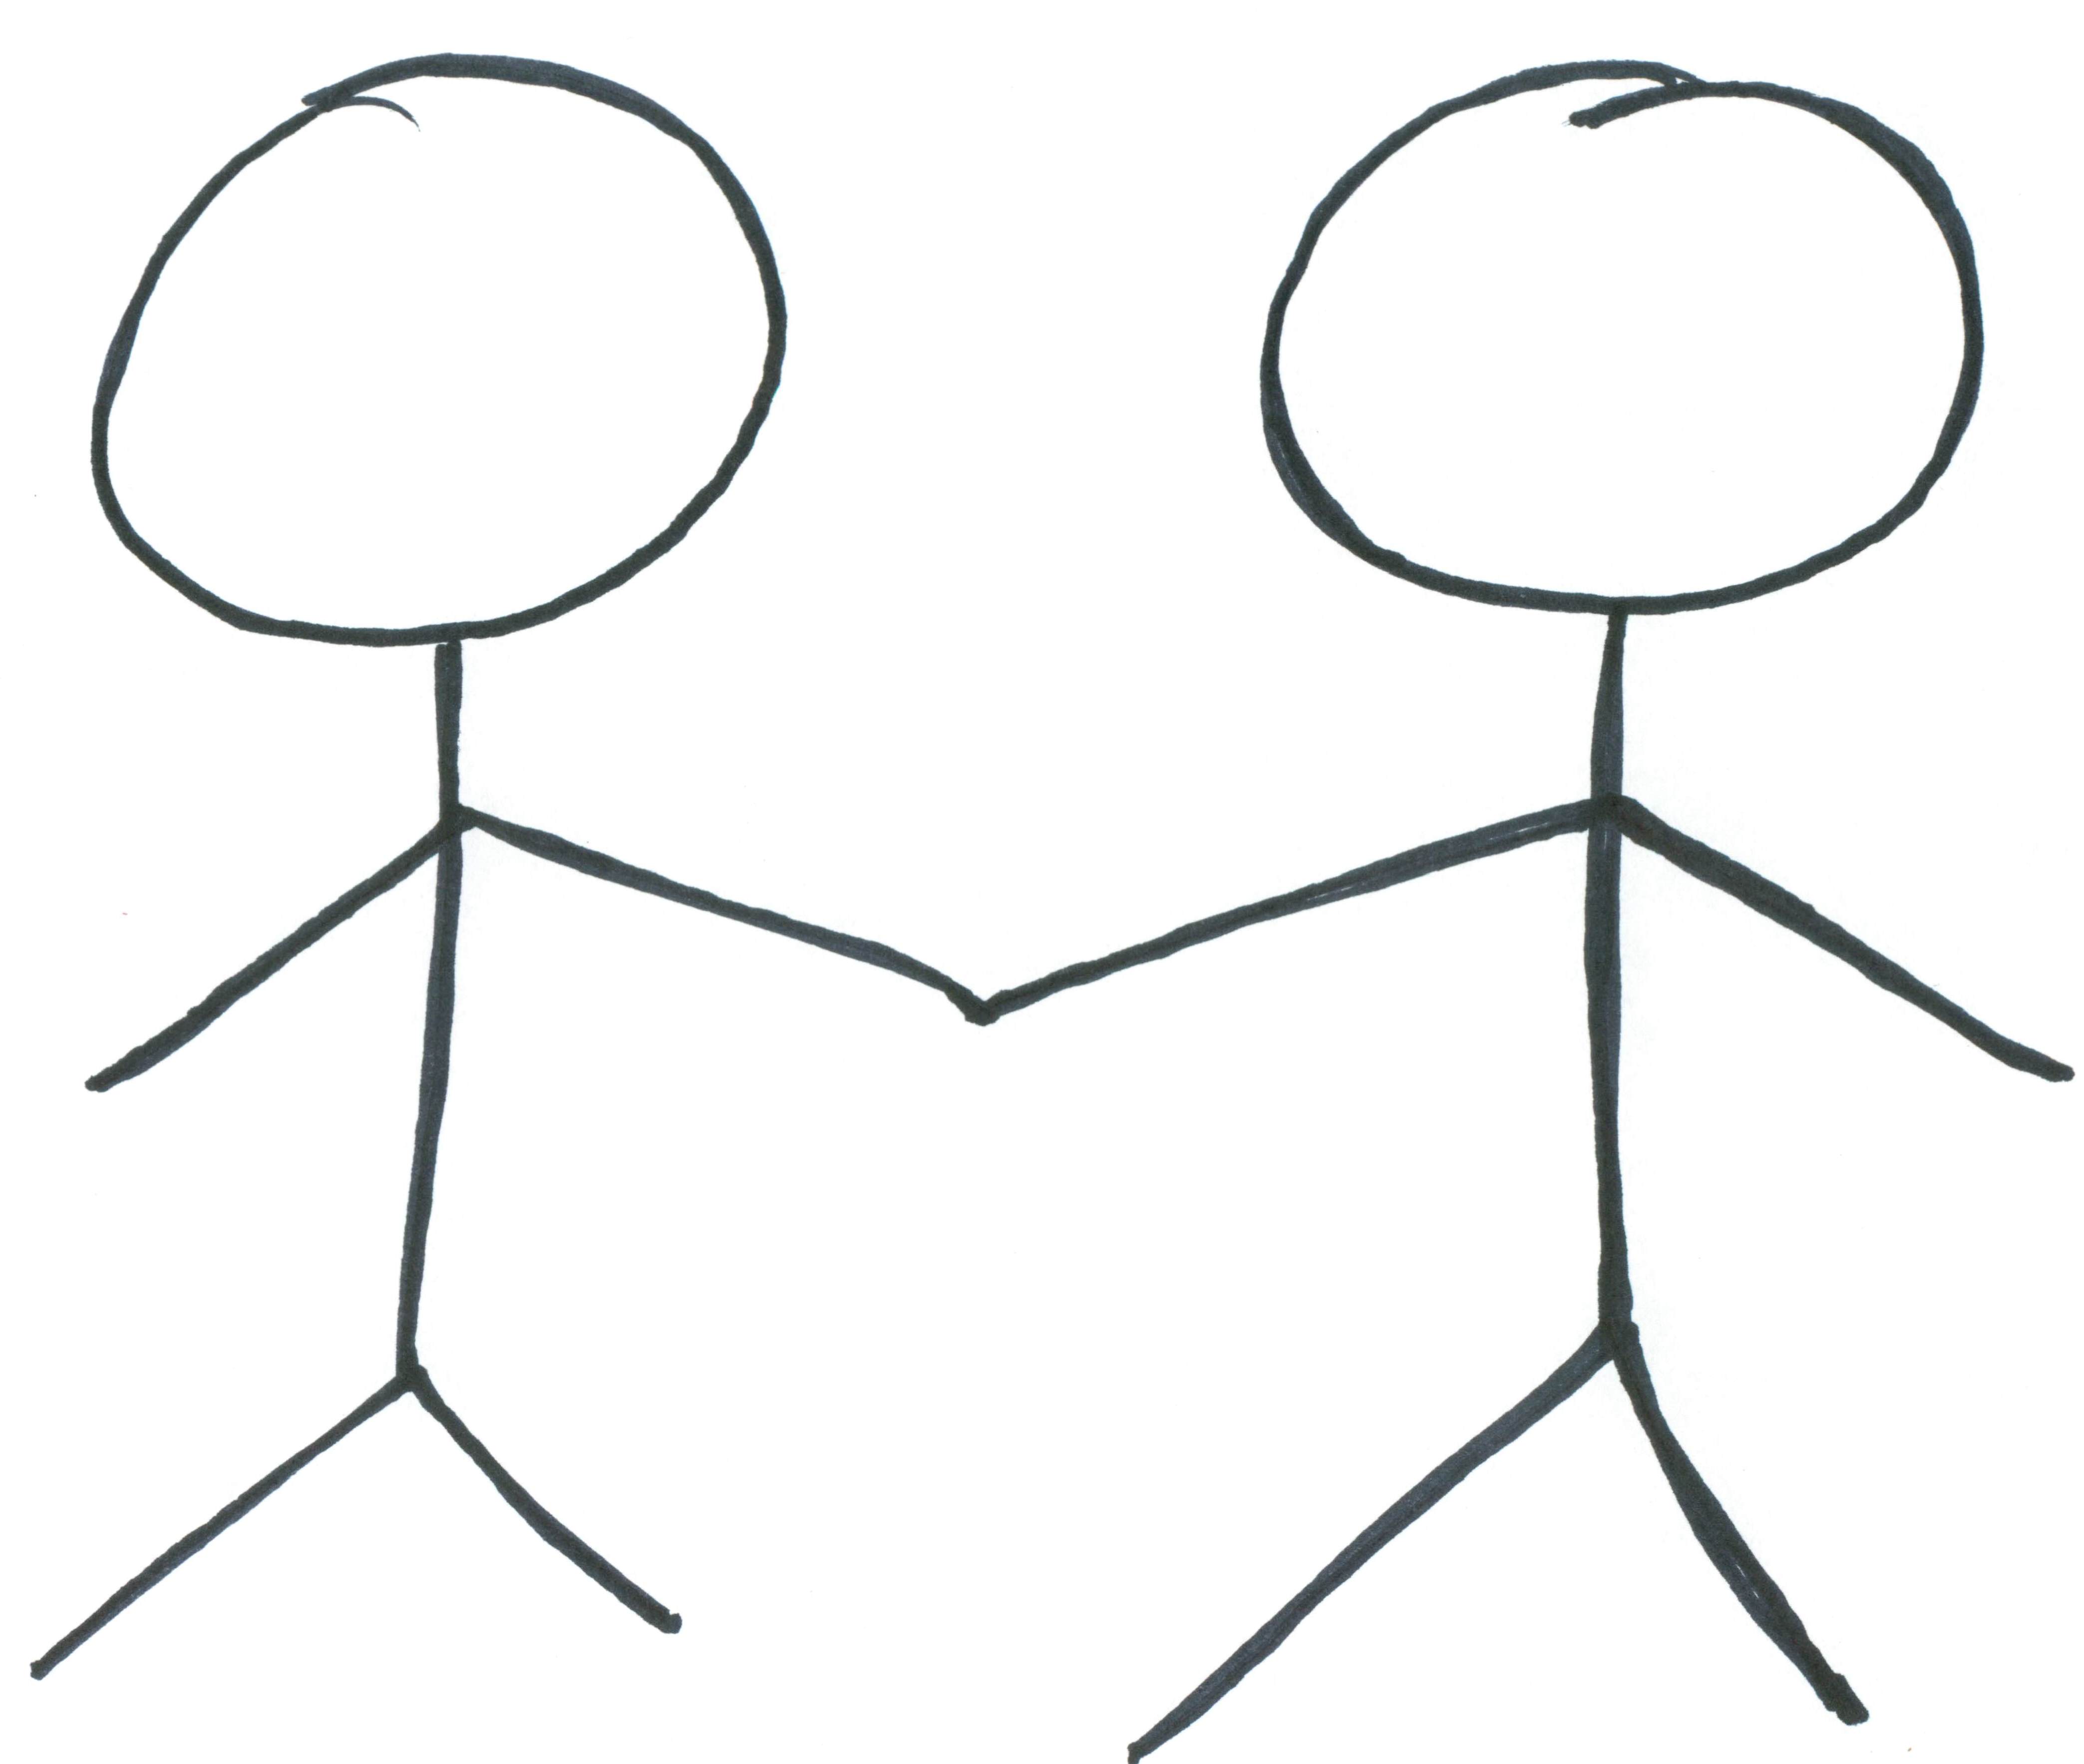 Stick People Holding Hands